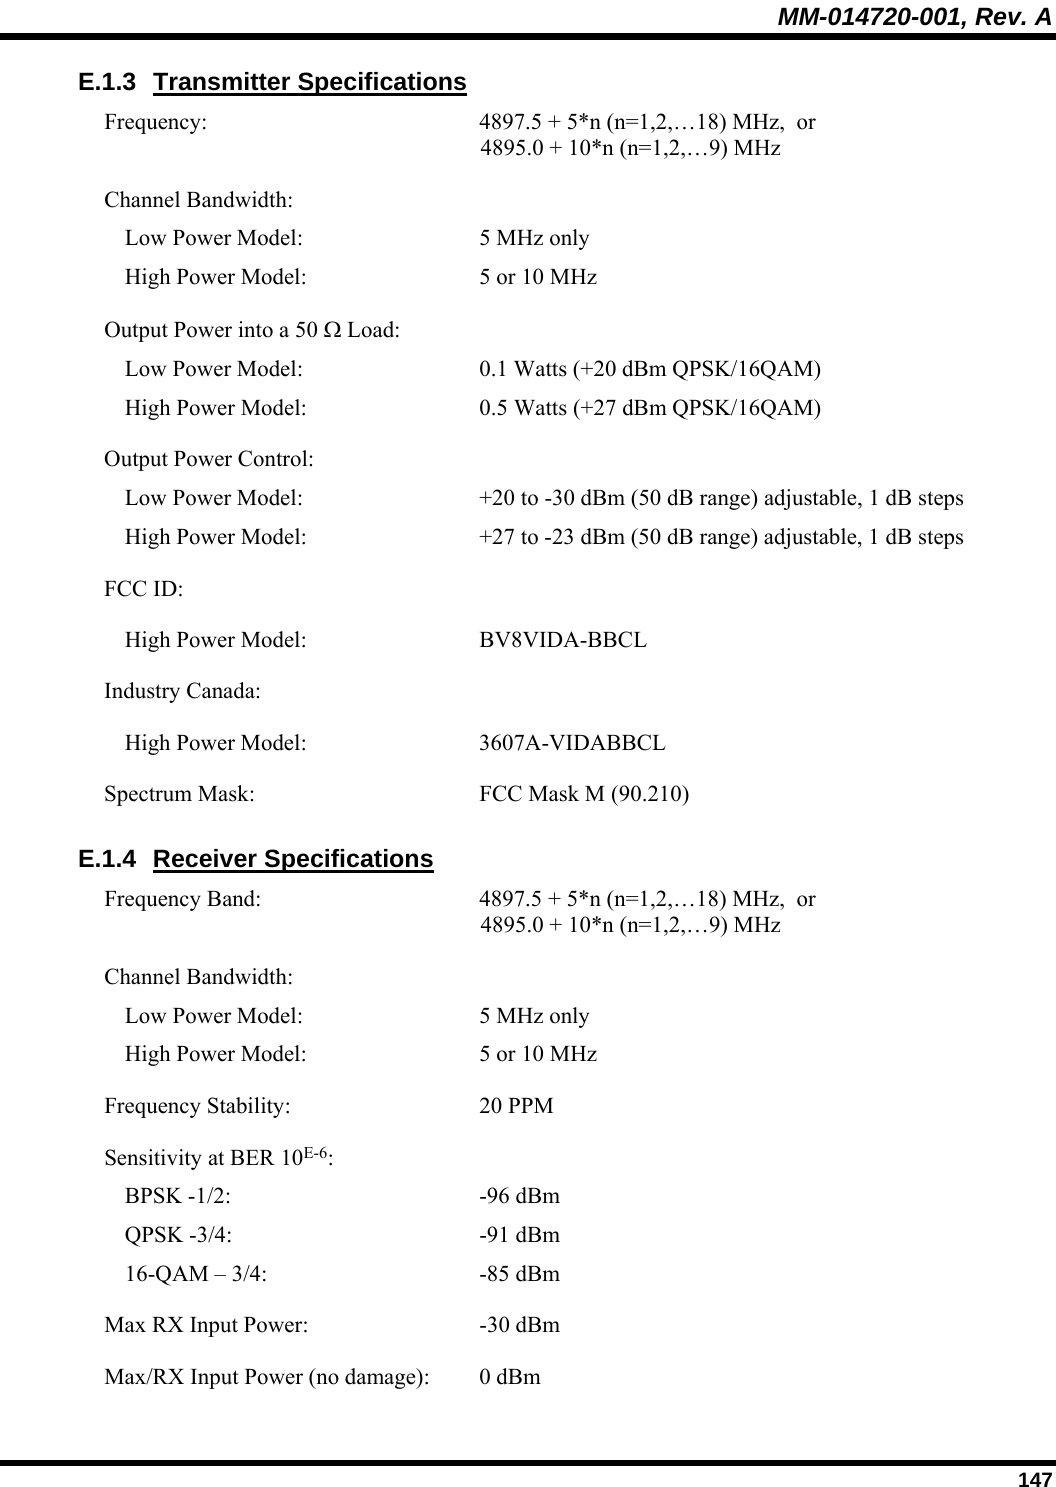 MM-014720-001, Rev. A  147 E.1.3 Transmitter Specifications Frequency:  4897.5 + 5*n (n=1,2,…18) MHz,  or  4895.0 + 10*n (n=1,2,…9) MHz Channel Bandwidth:     Low Power Model:  5 MHz only   High Power Model:  5 or 10 MHz Output Power into a 50 Ω Load:     Low Power Model:  0.1 Watts (+20 dBm QPSK/16QAM)   High Power Model:  0.5 Watts (+27 dBm QPSK/16QAM) Output Power Control:     Low Power Model:  +20 to -30 dBm (50 dB range) adjustable, 1 dB steps   High Power Model:  +27 to -23 dBm (50 dB range) adjustable, 1 dB steps FCC ID:     High Power Model:  BV8VIDA-BBCL Industry Canada:     High Power Model:  3607A-VIDABBCL Spectrum Mask:  FCC Mask M (90.210) E.1.4 Receiver Specifications Frequency Band:  4897.5 + 5*n (n=1,2,…18) MHz,  or  4895.0 + 10*n (n=1,2,…9) MHz Channel Bandwidth:     Low Power Model:  5 MHz only   High Power Model:  5 or 10 MHz Frequency Stability:  20 PPM Sensitivity at BER 10E-6:     BPSK -1/2:  -96 dBm   QPSK -3/4:  -91 dBm   16-QAM – 3/4:  -85 dBm Max RX Input Power:   -30 dBm Max/RX Input Power (no damage):  0 dBm 